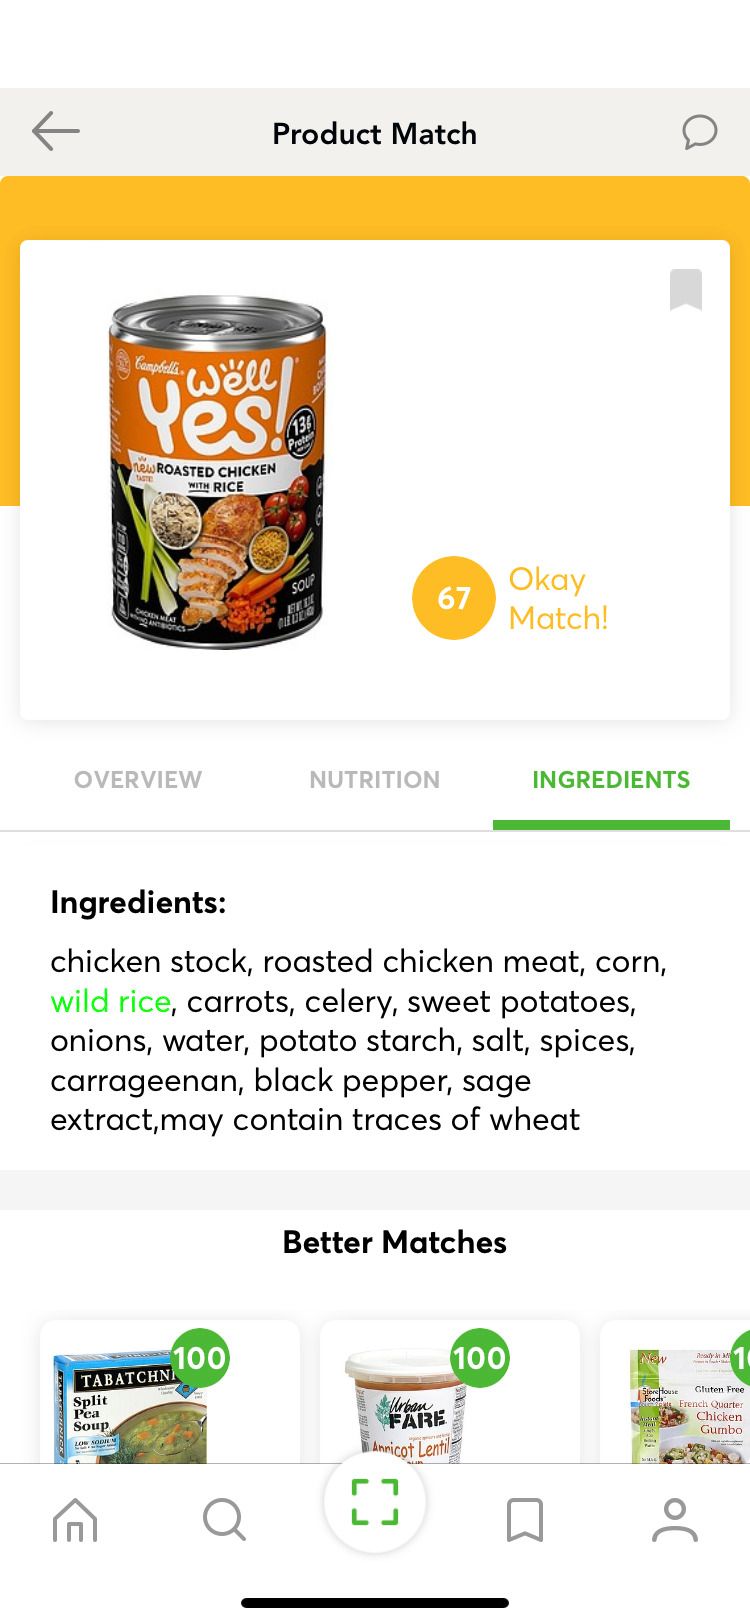 ShopWell app app Well Yes Roasted Chicken Ingredients